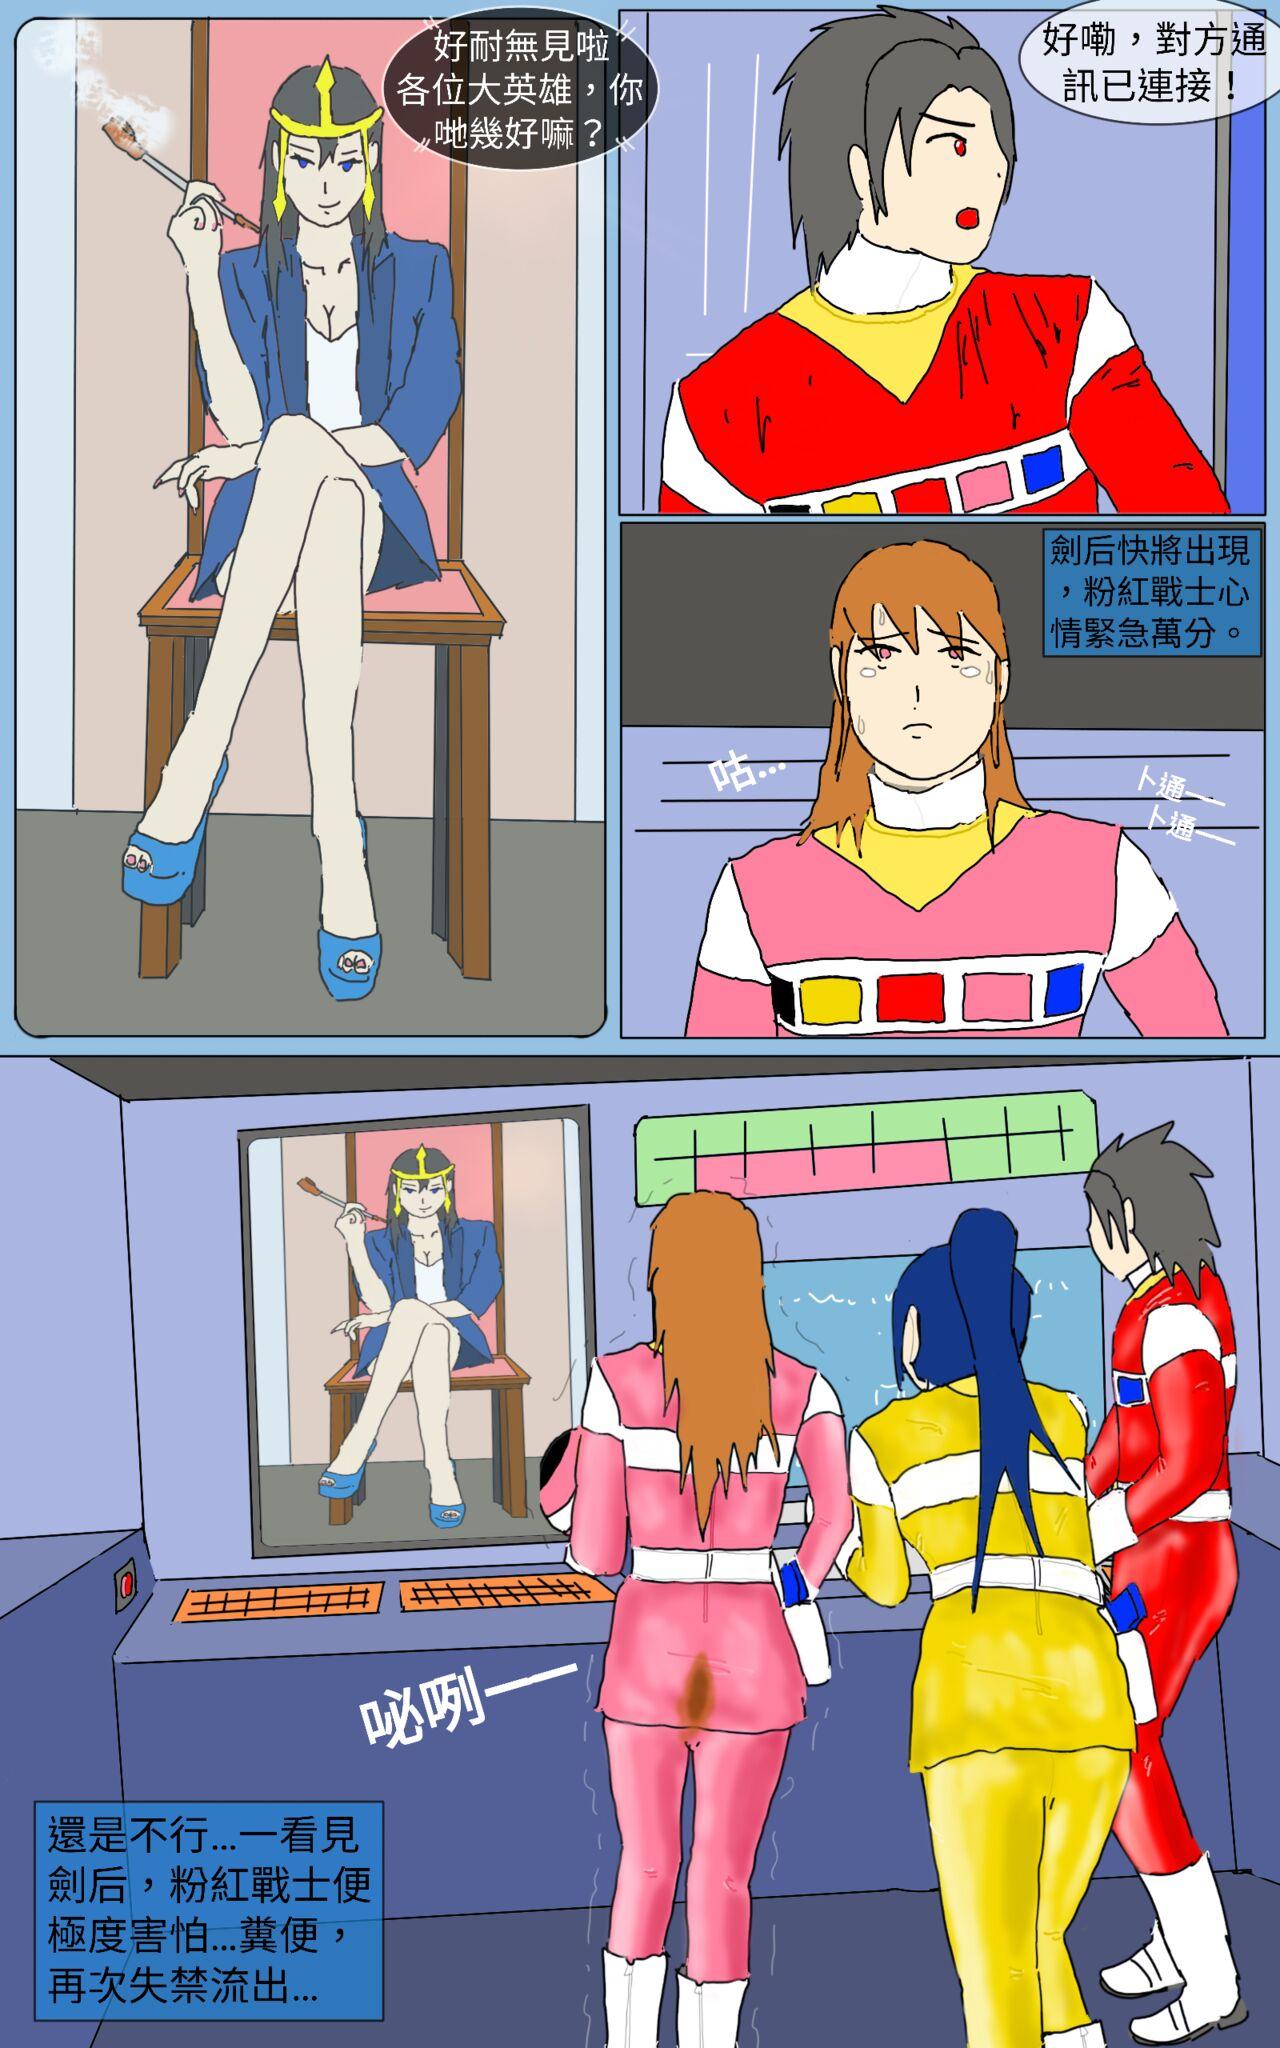 Monster Mission 16 - Super sentai Gay Bus - Page 2